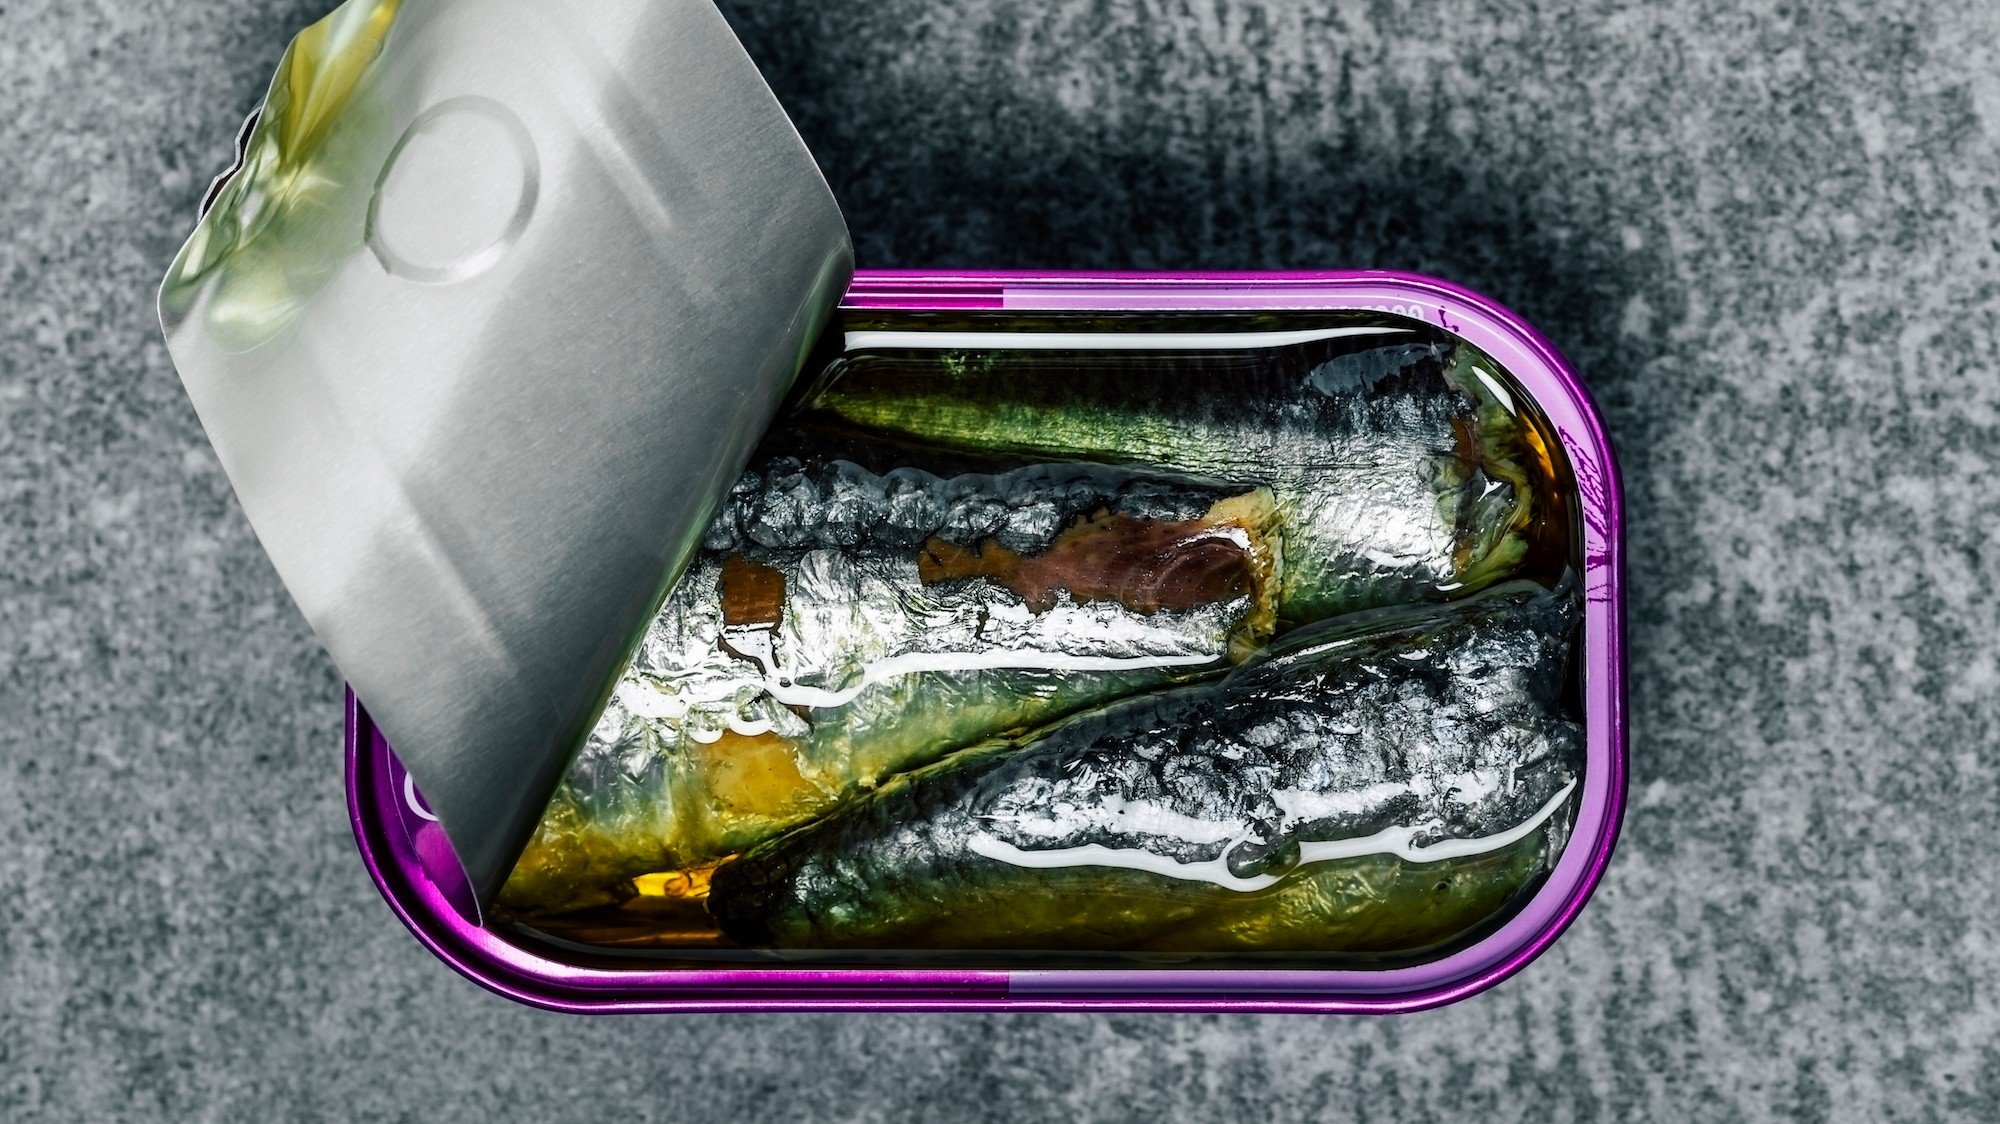 Why Is Tinned Fish ‘Hot Girl Food’ Now?